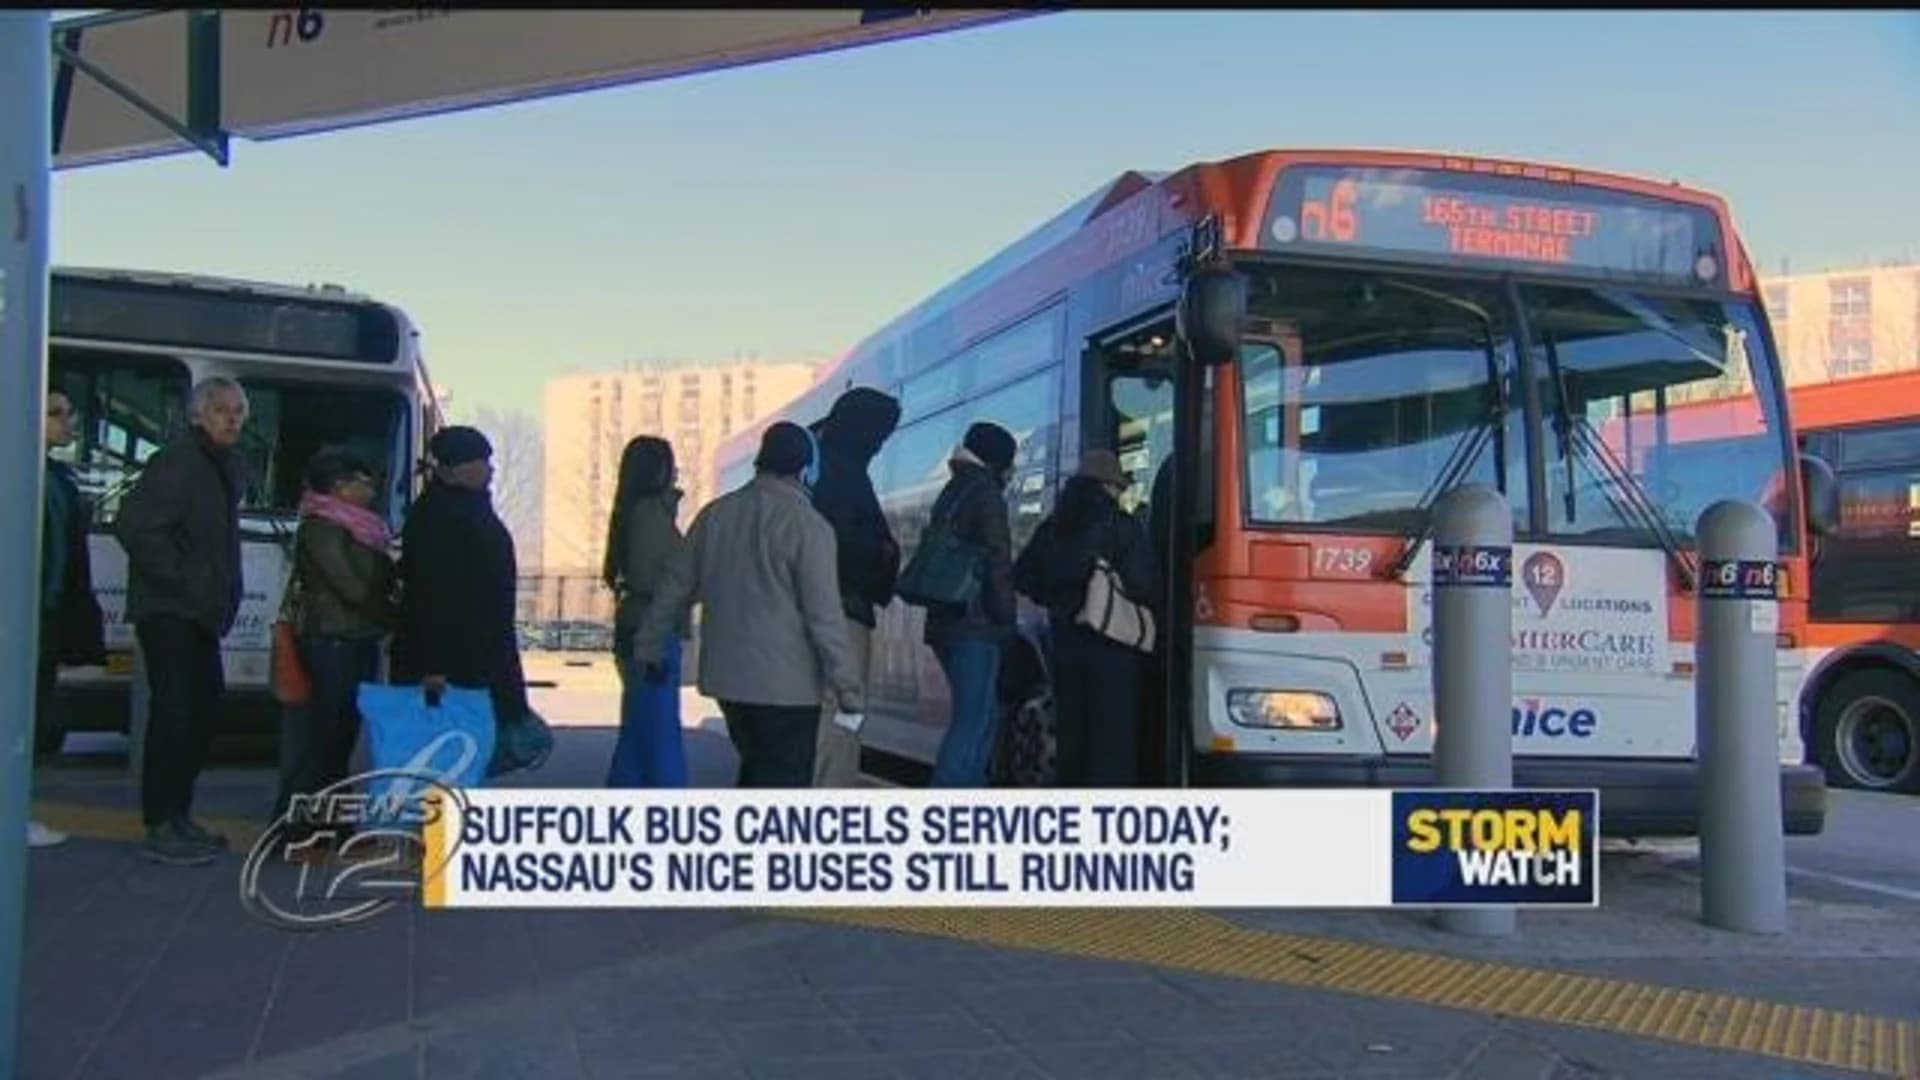 Buses, ferries and airport services canceled as nor'easter hits LI